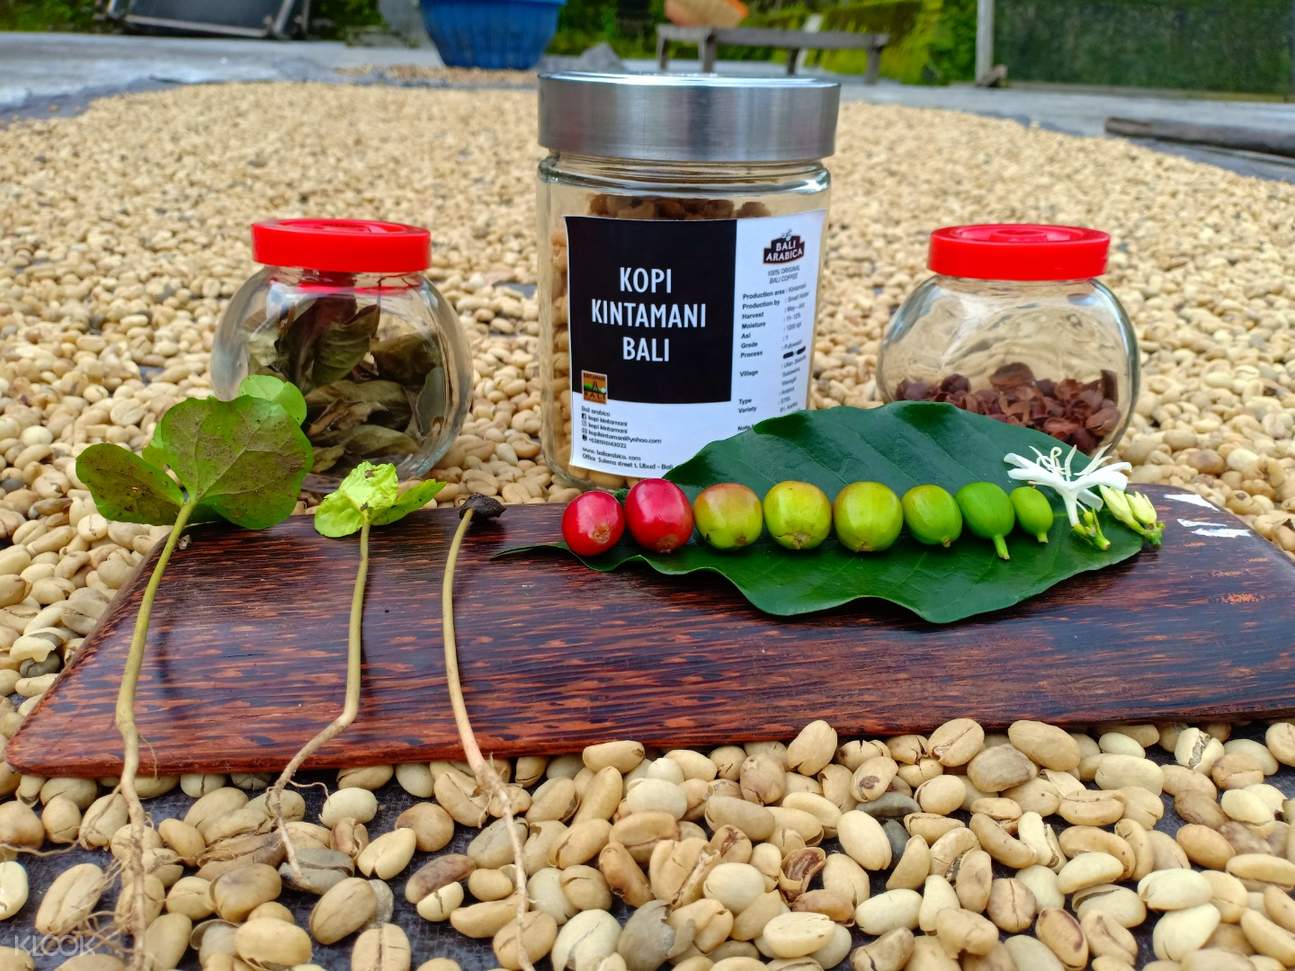 Coffee Plantation Visit with Luwak Coffee Tasting Experience in Bali